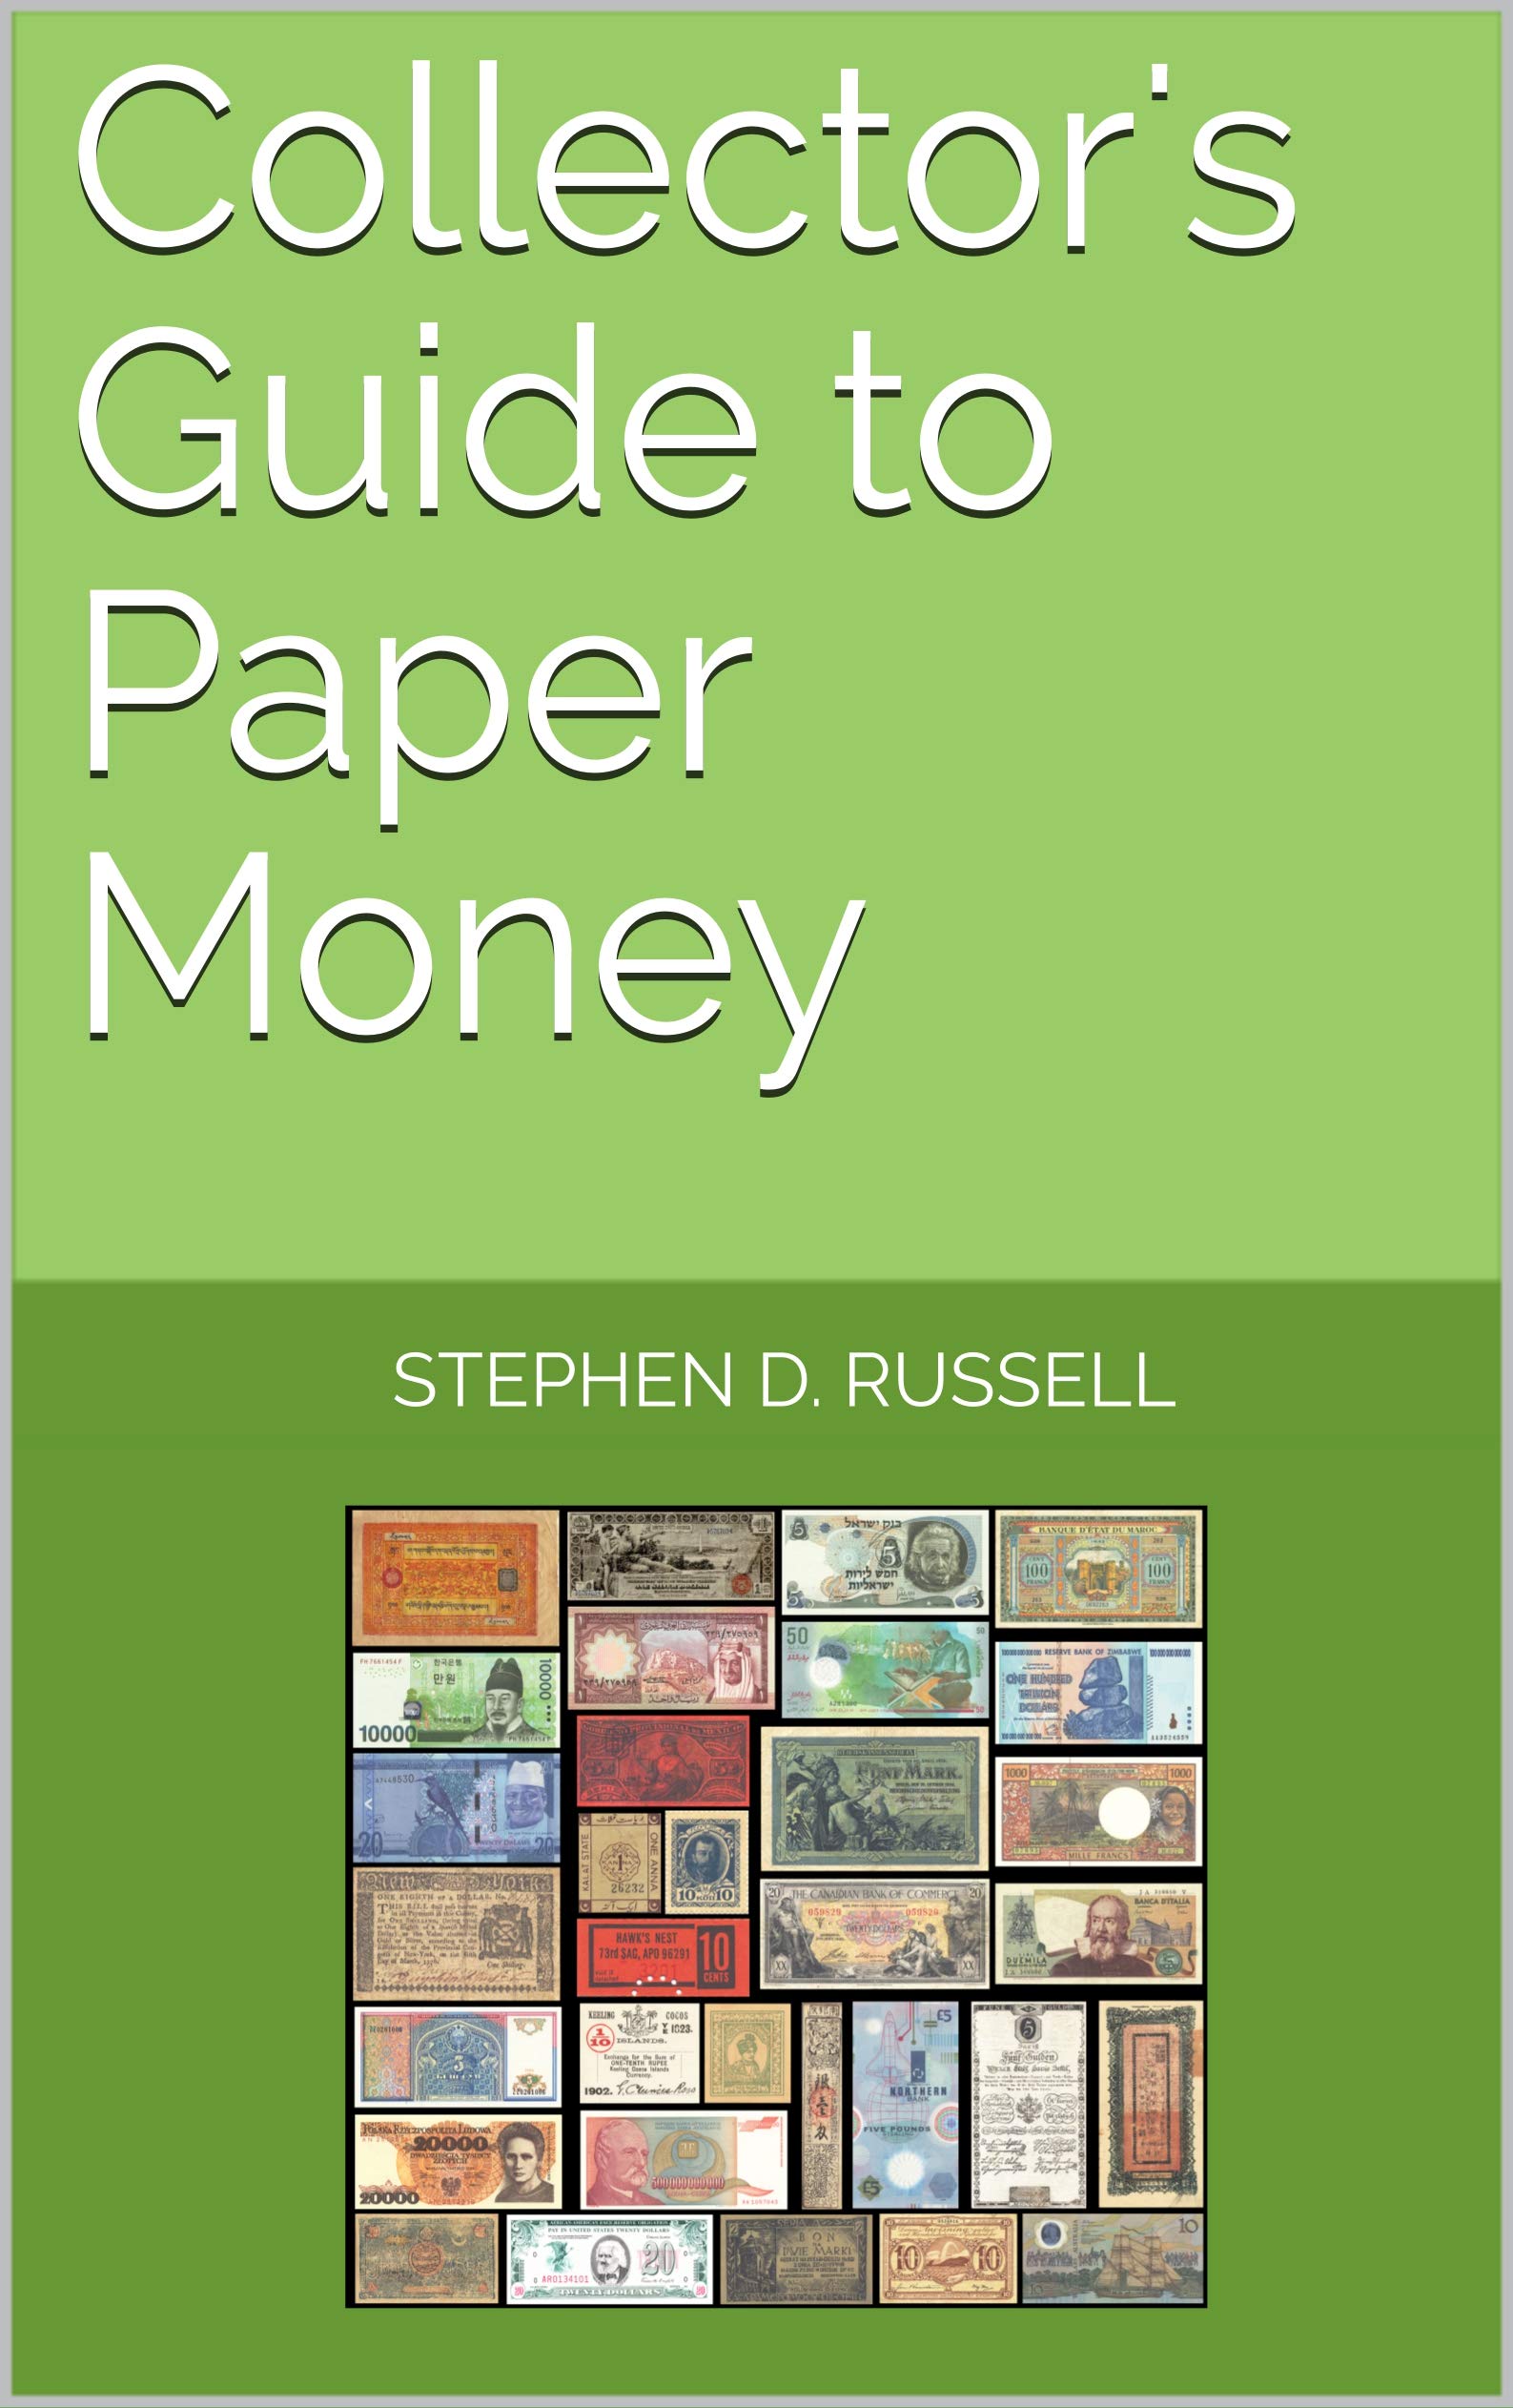 Collector's Guide to Paper Money